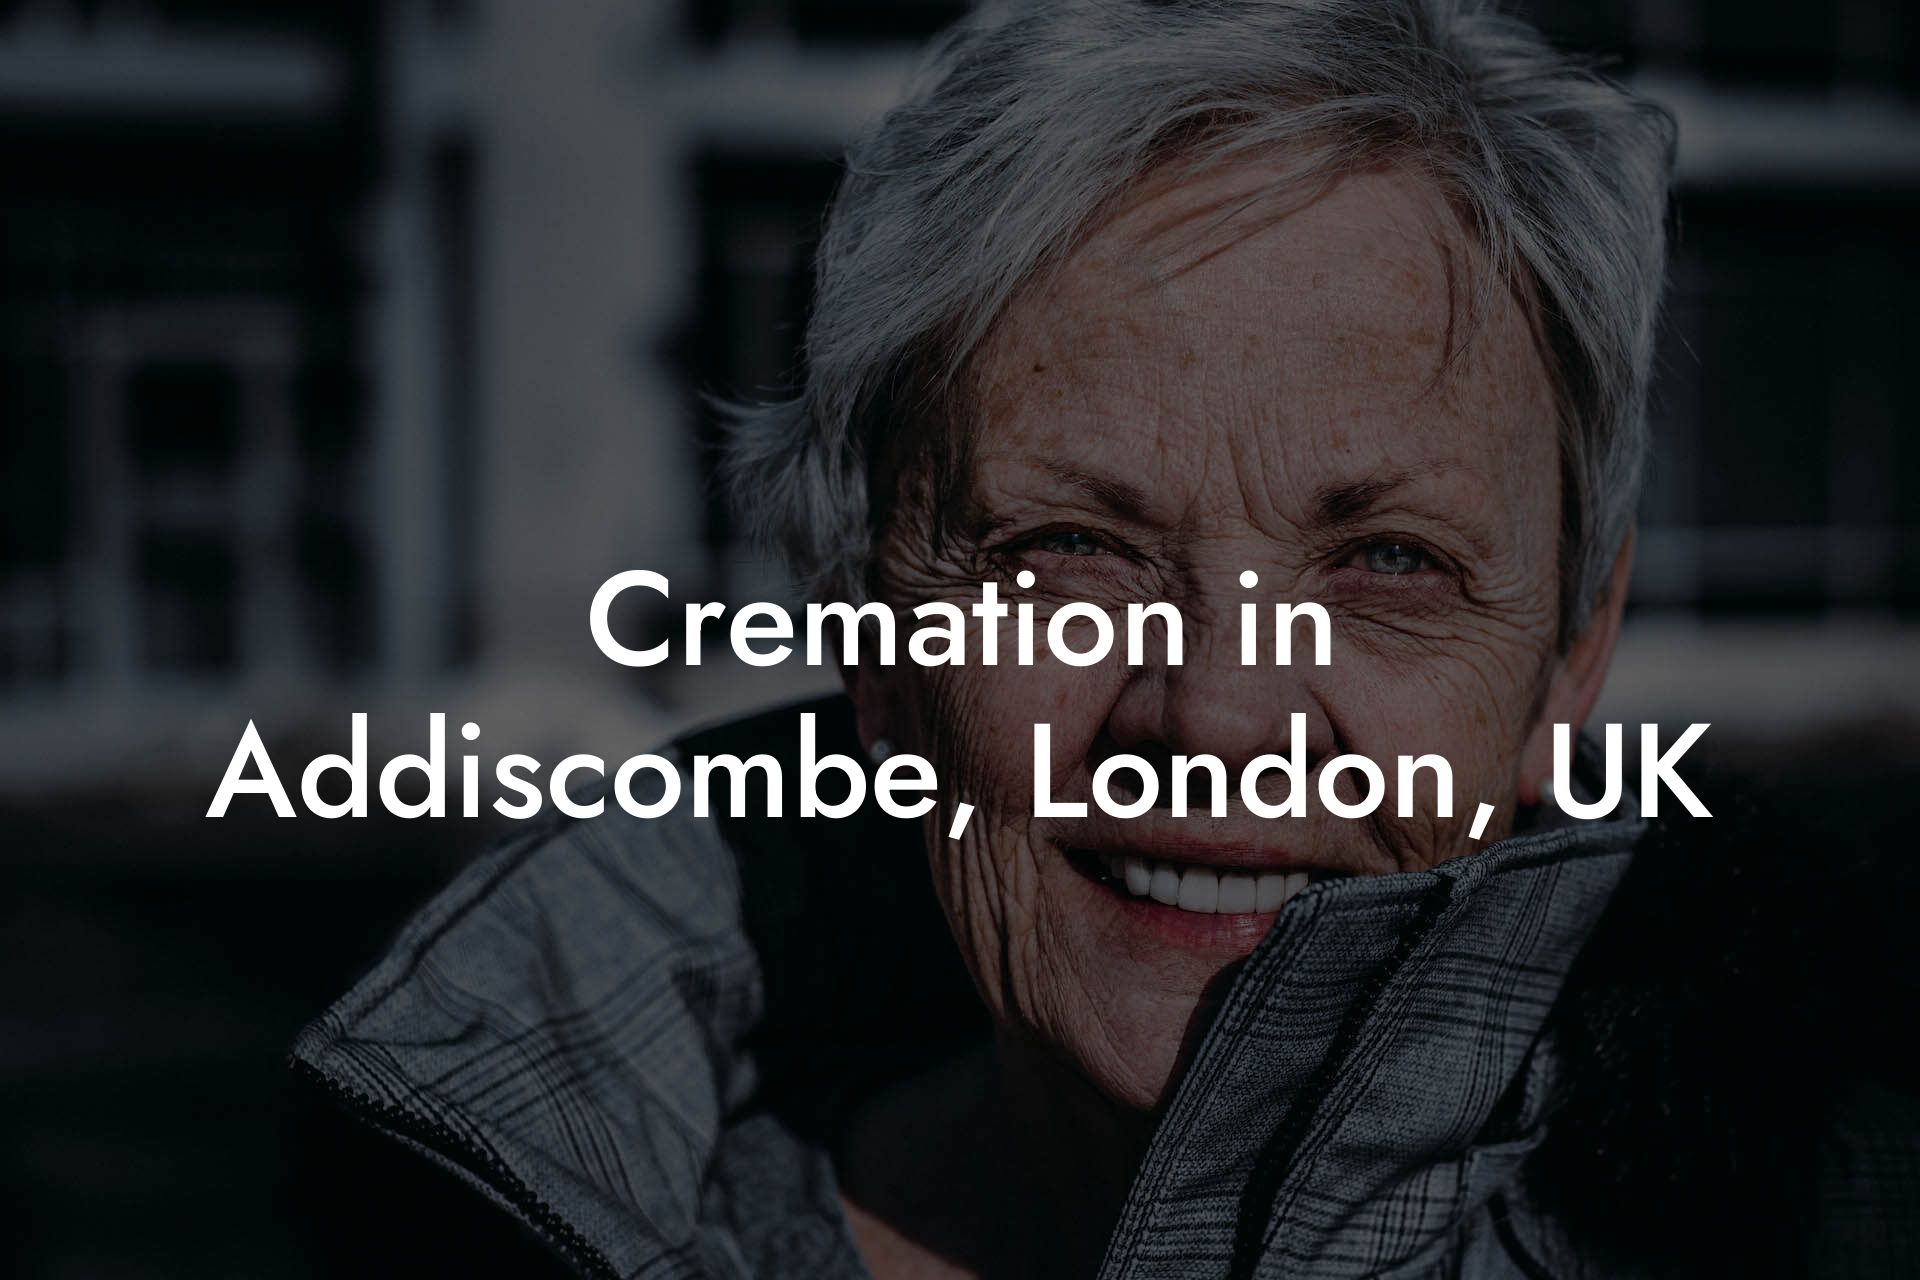 Cremation in Addiscombe, London, UK